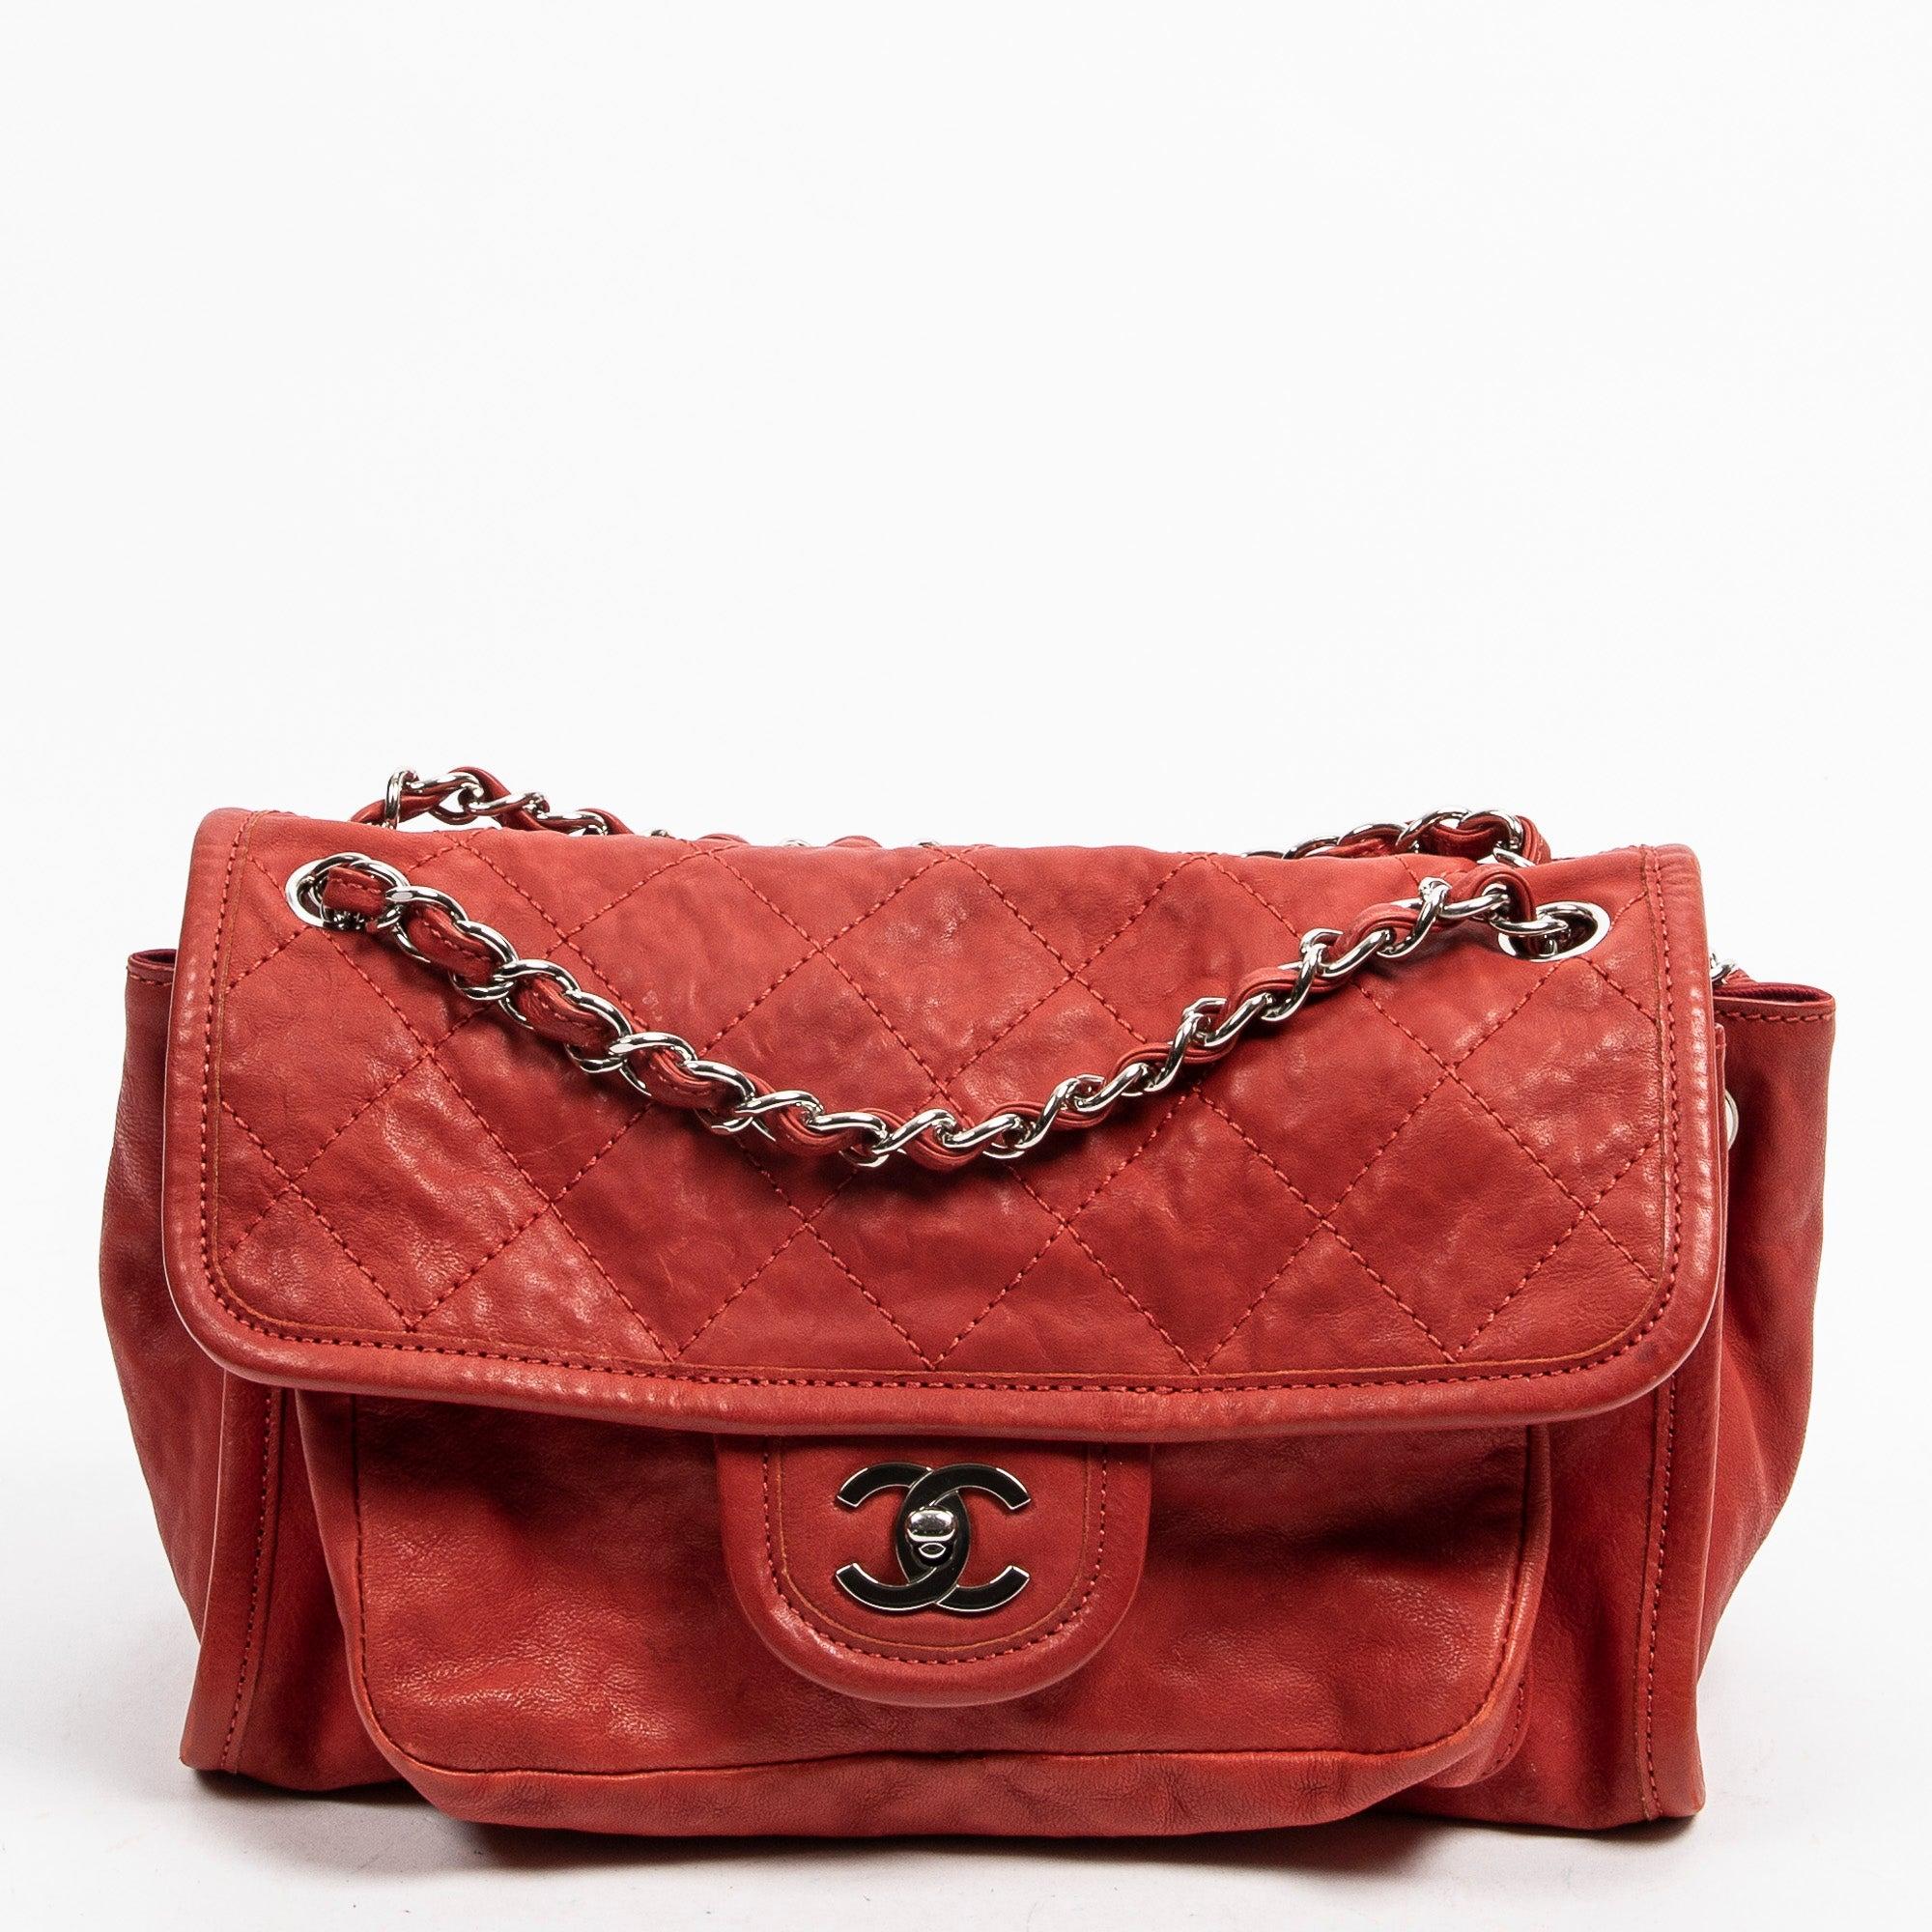 Chanel French Riviera Flap Bag in Red